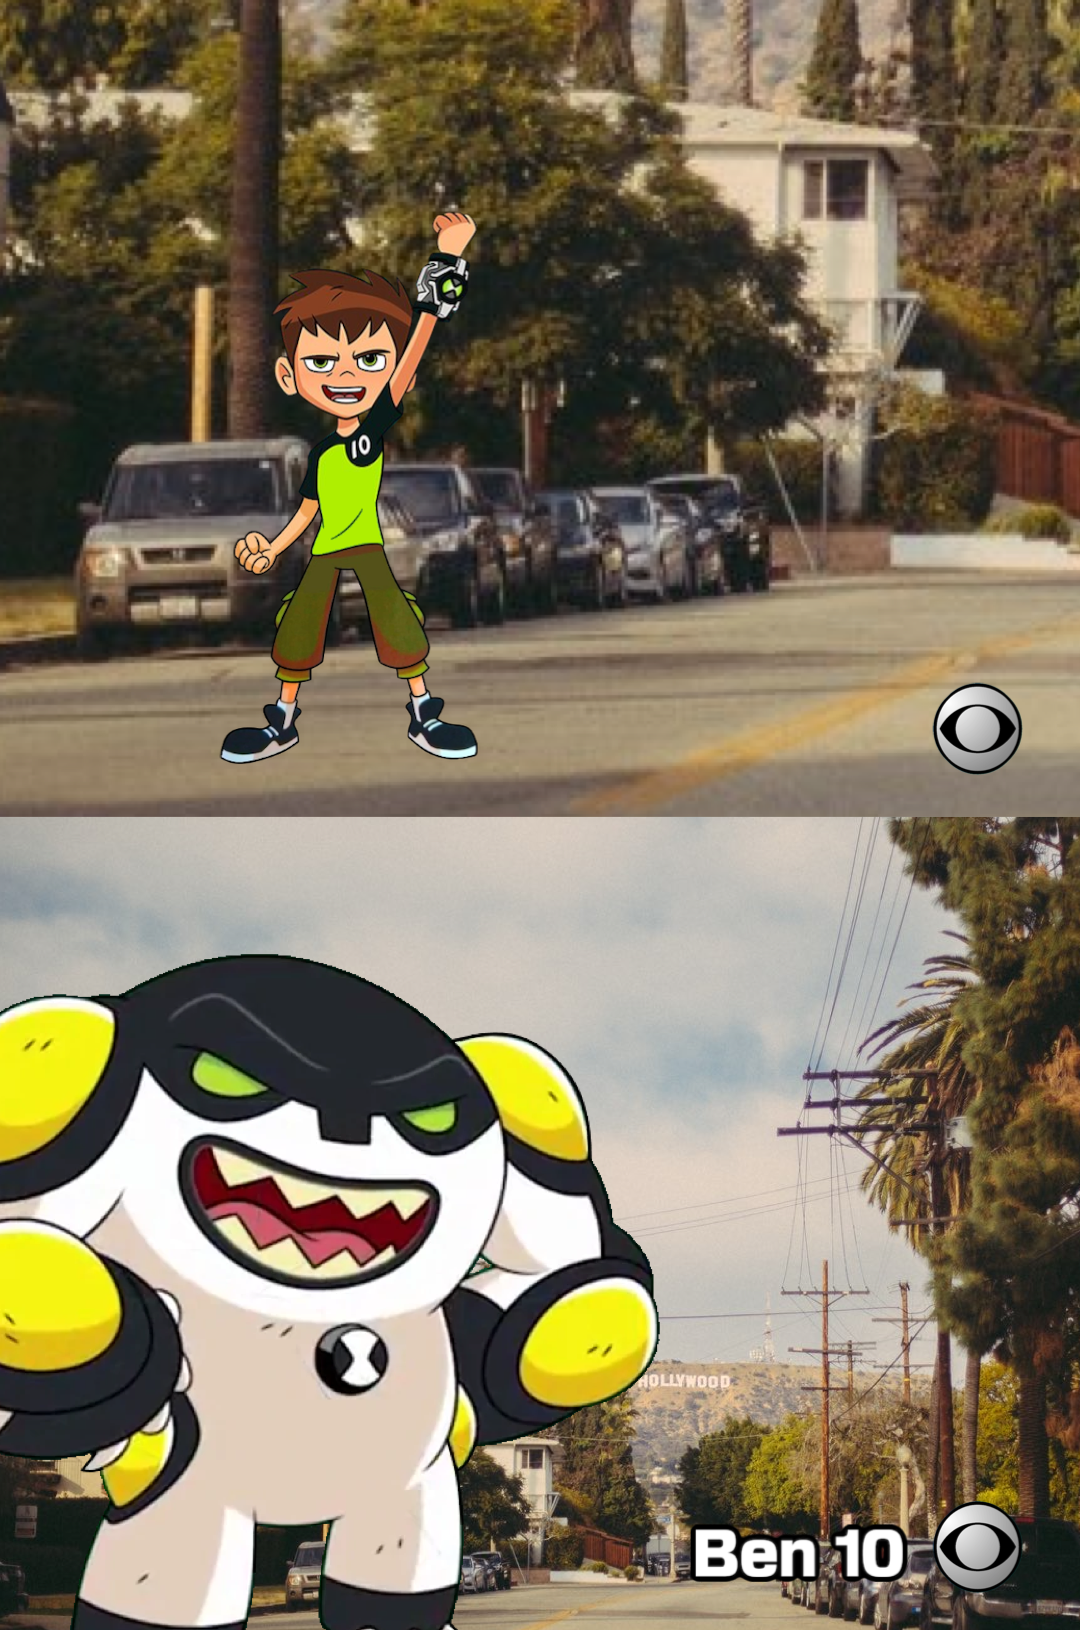 Ben 10' Reboot in the Works at Cartoon Network – The Hollywood